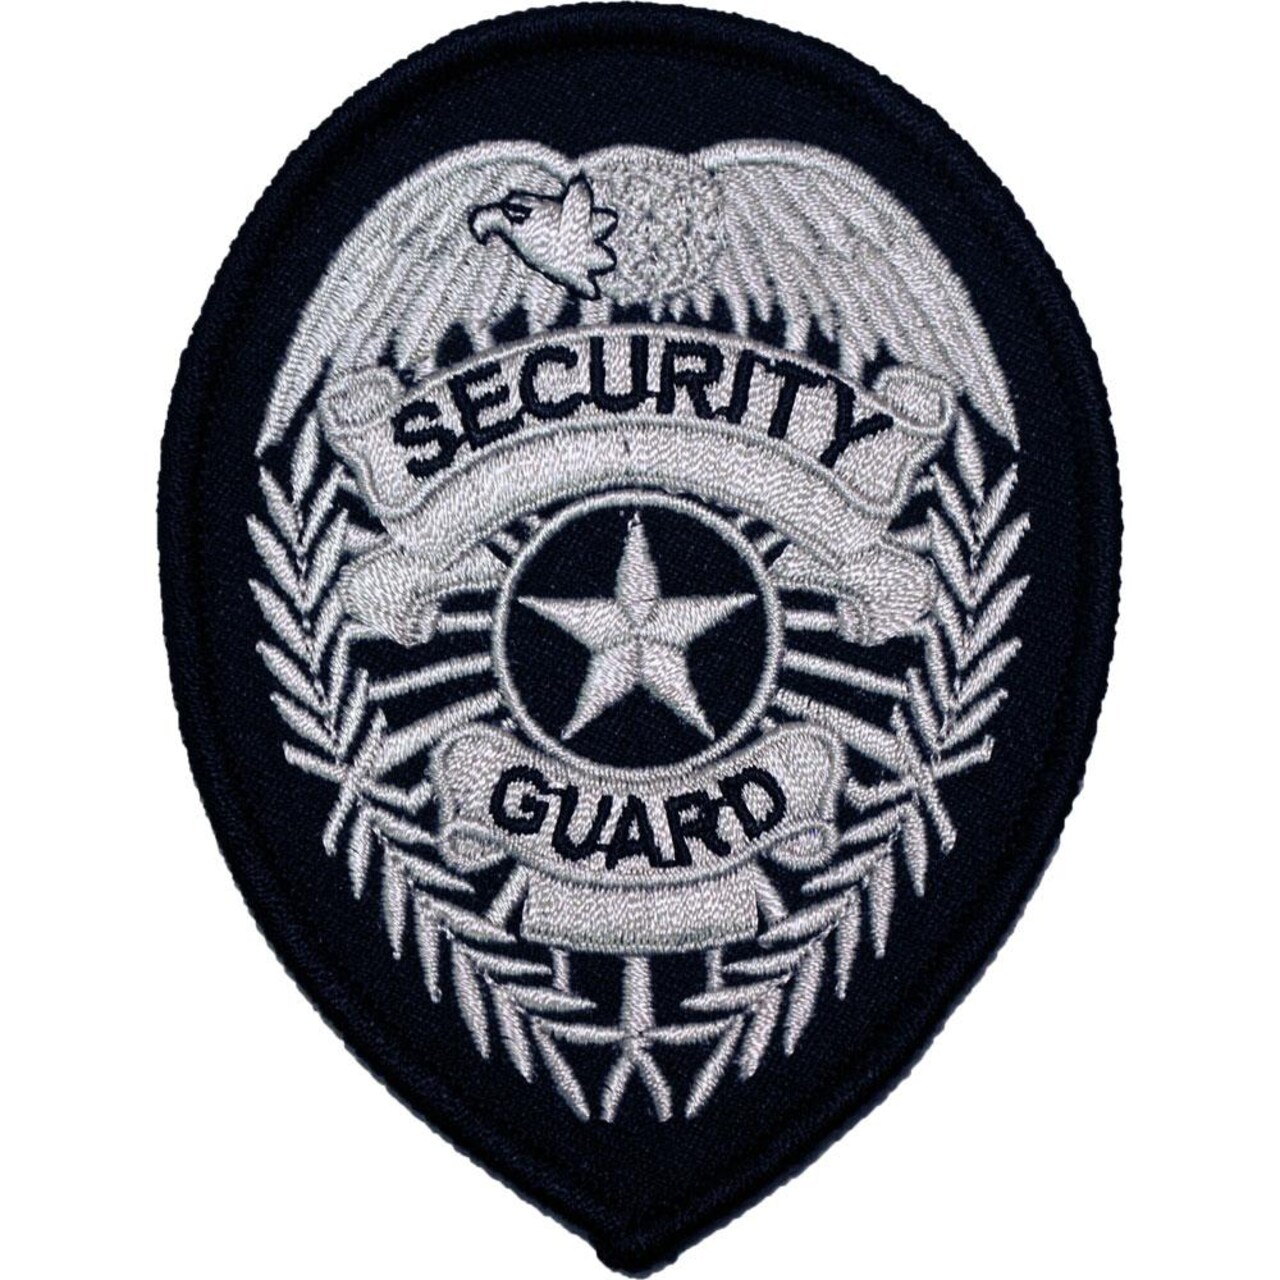 Security Guard Shield Patch Black & Silver 3 3/4